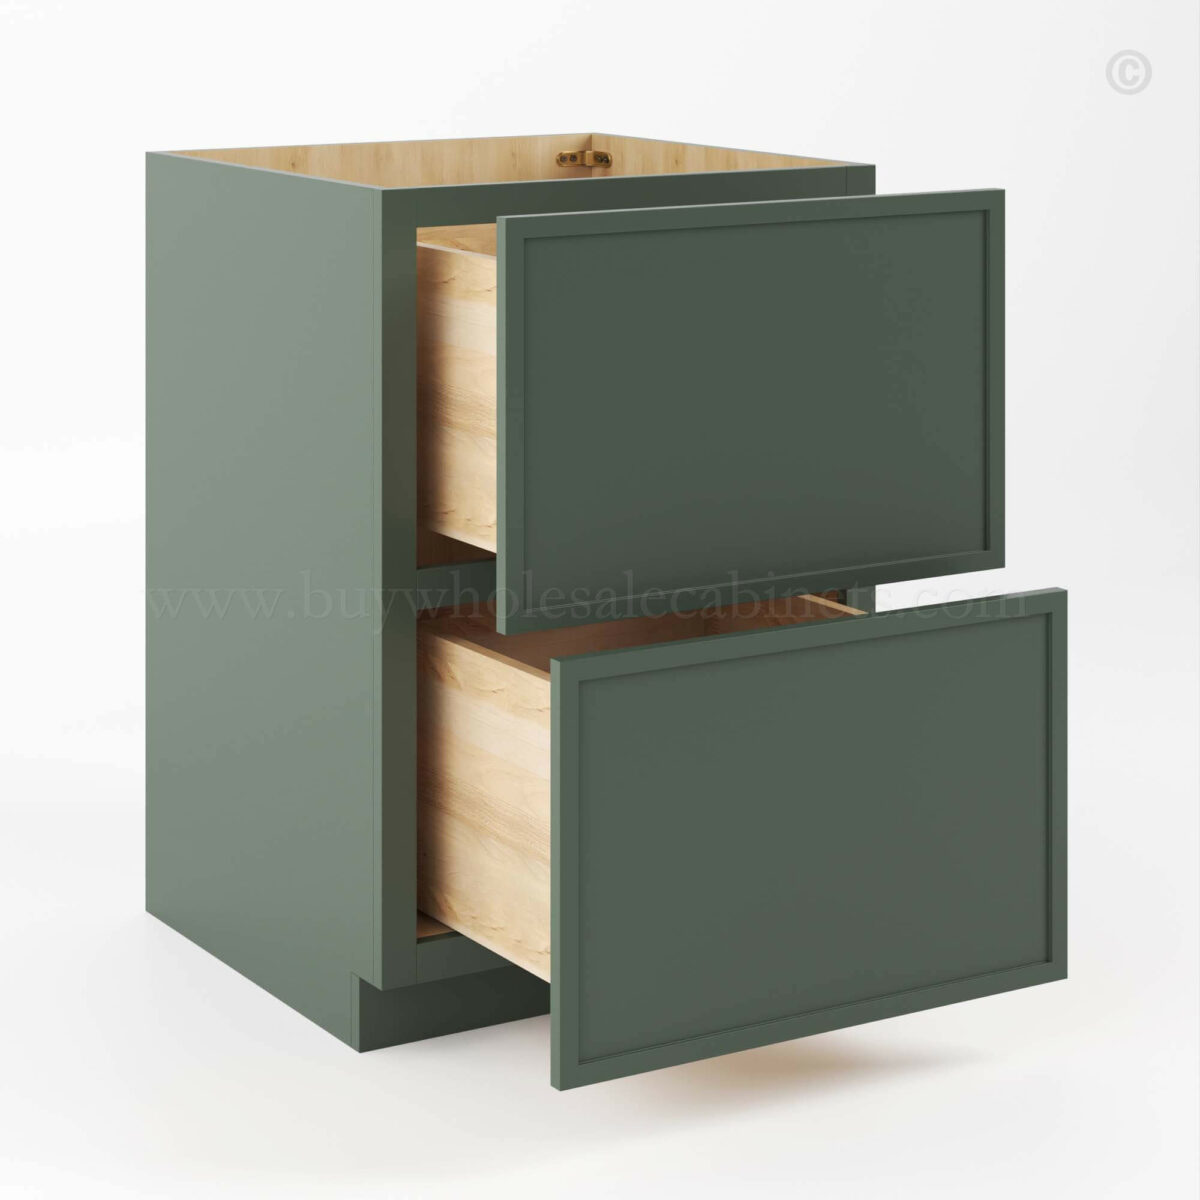 Slim Shaker Green Base Cabinet with 2 Drawers, rta cabinets, wholesale cabinets